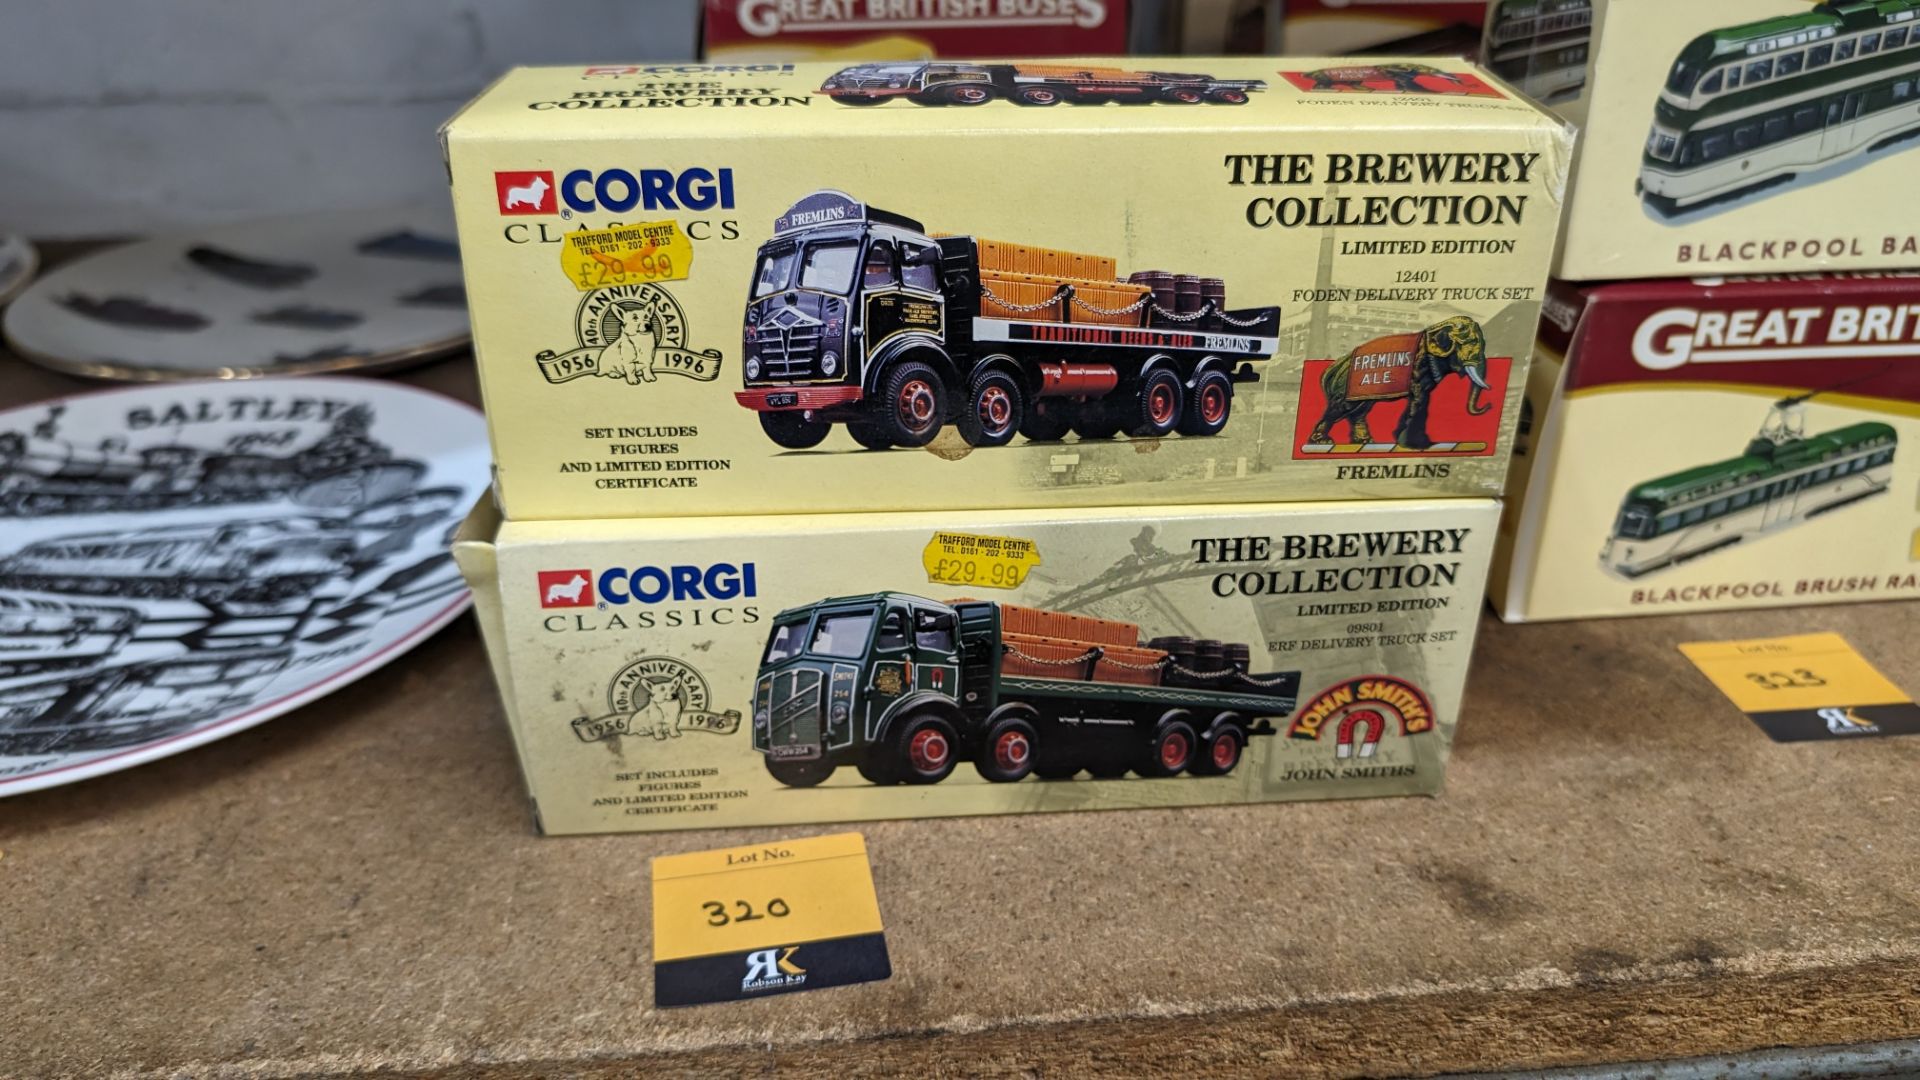 2 off Corgi classics brewery collection limited edition delivery truck sets (John Smiths & Fremlins) - Image 2 of 6